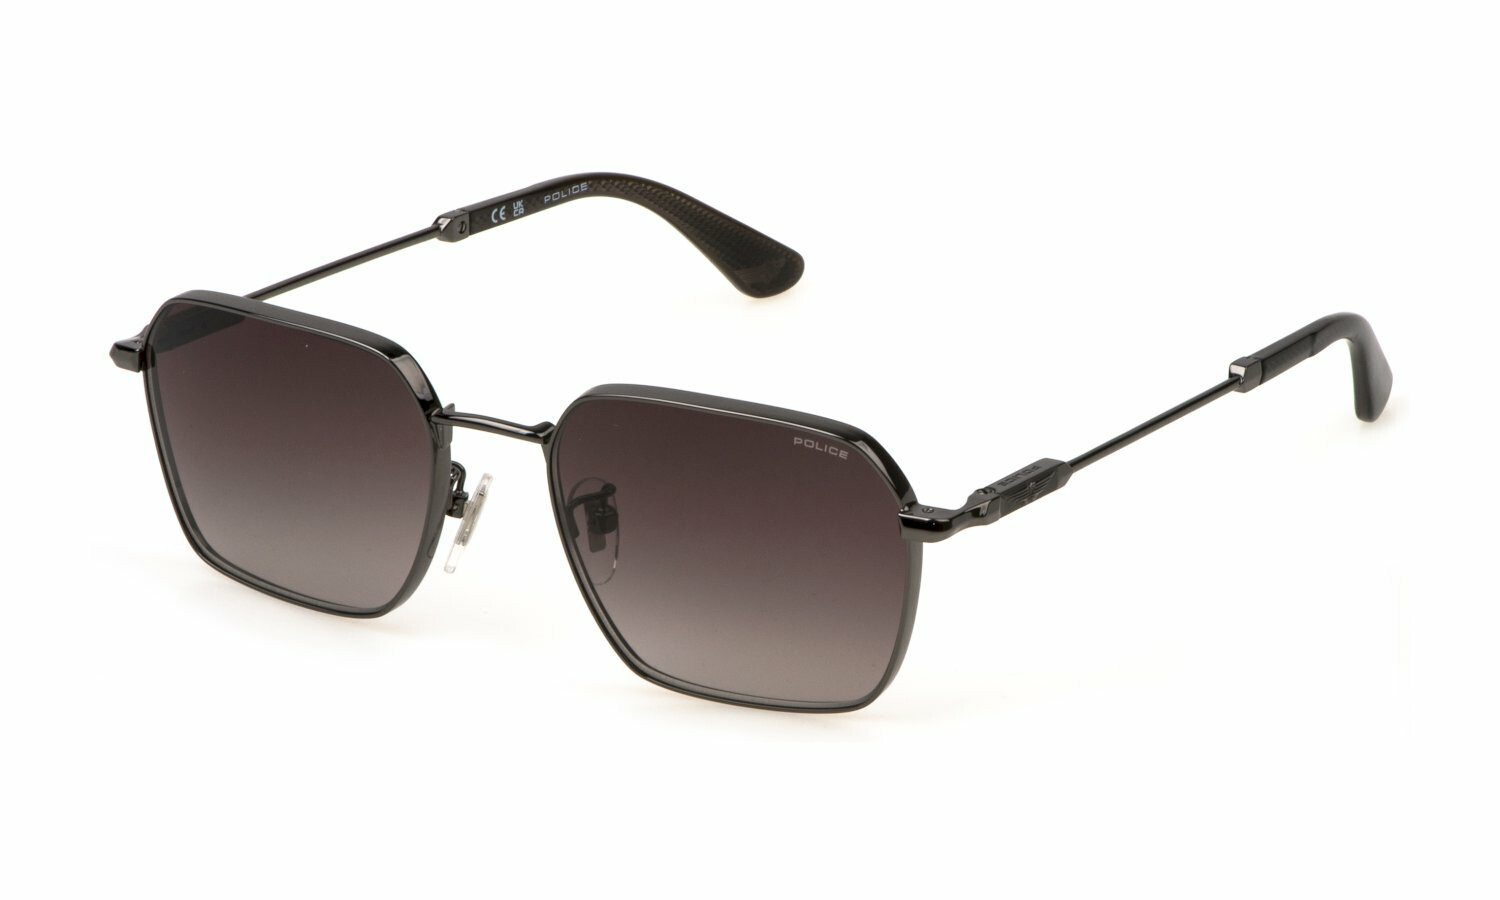 [products.image.front] Police HORIZON 10 SPLN41 0568 Sonnenbrille